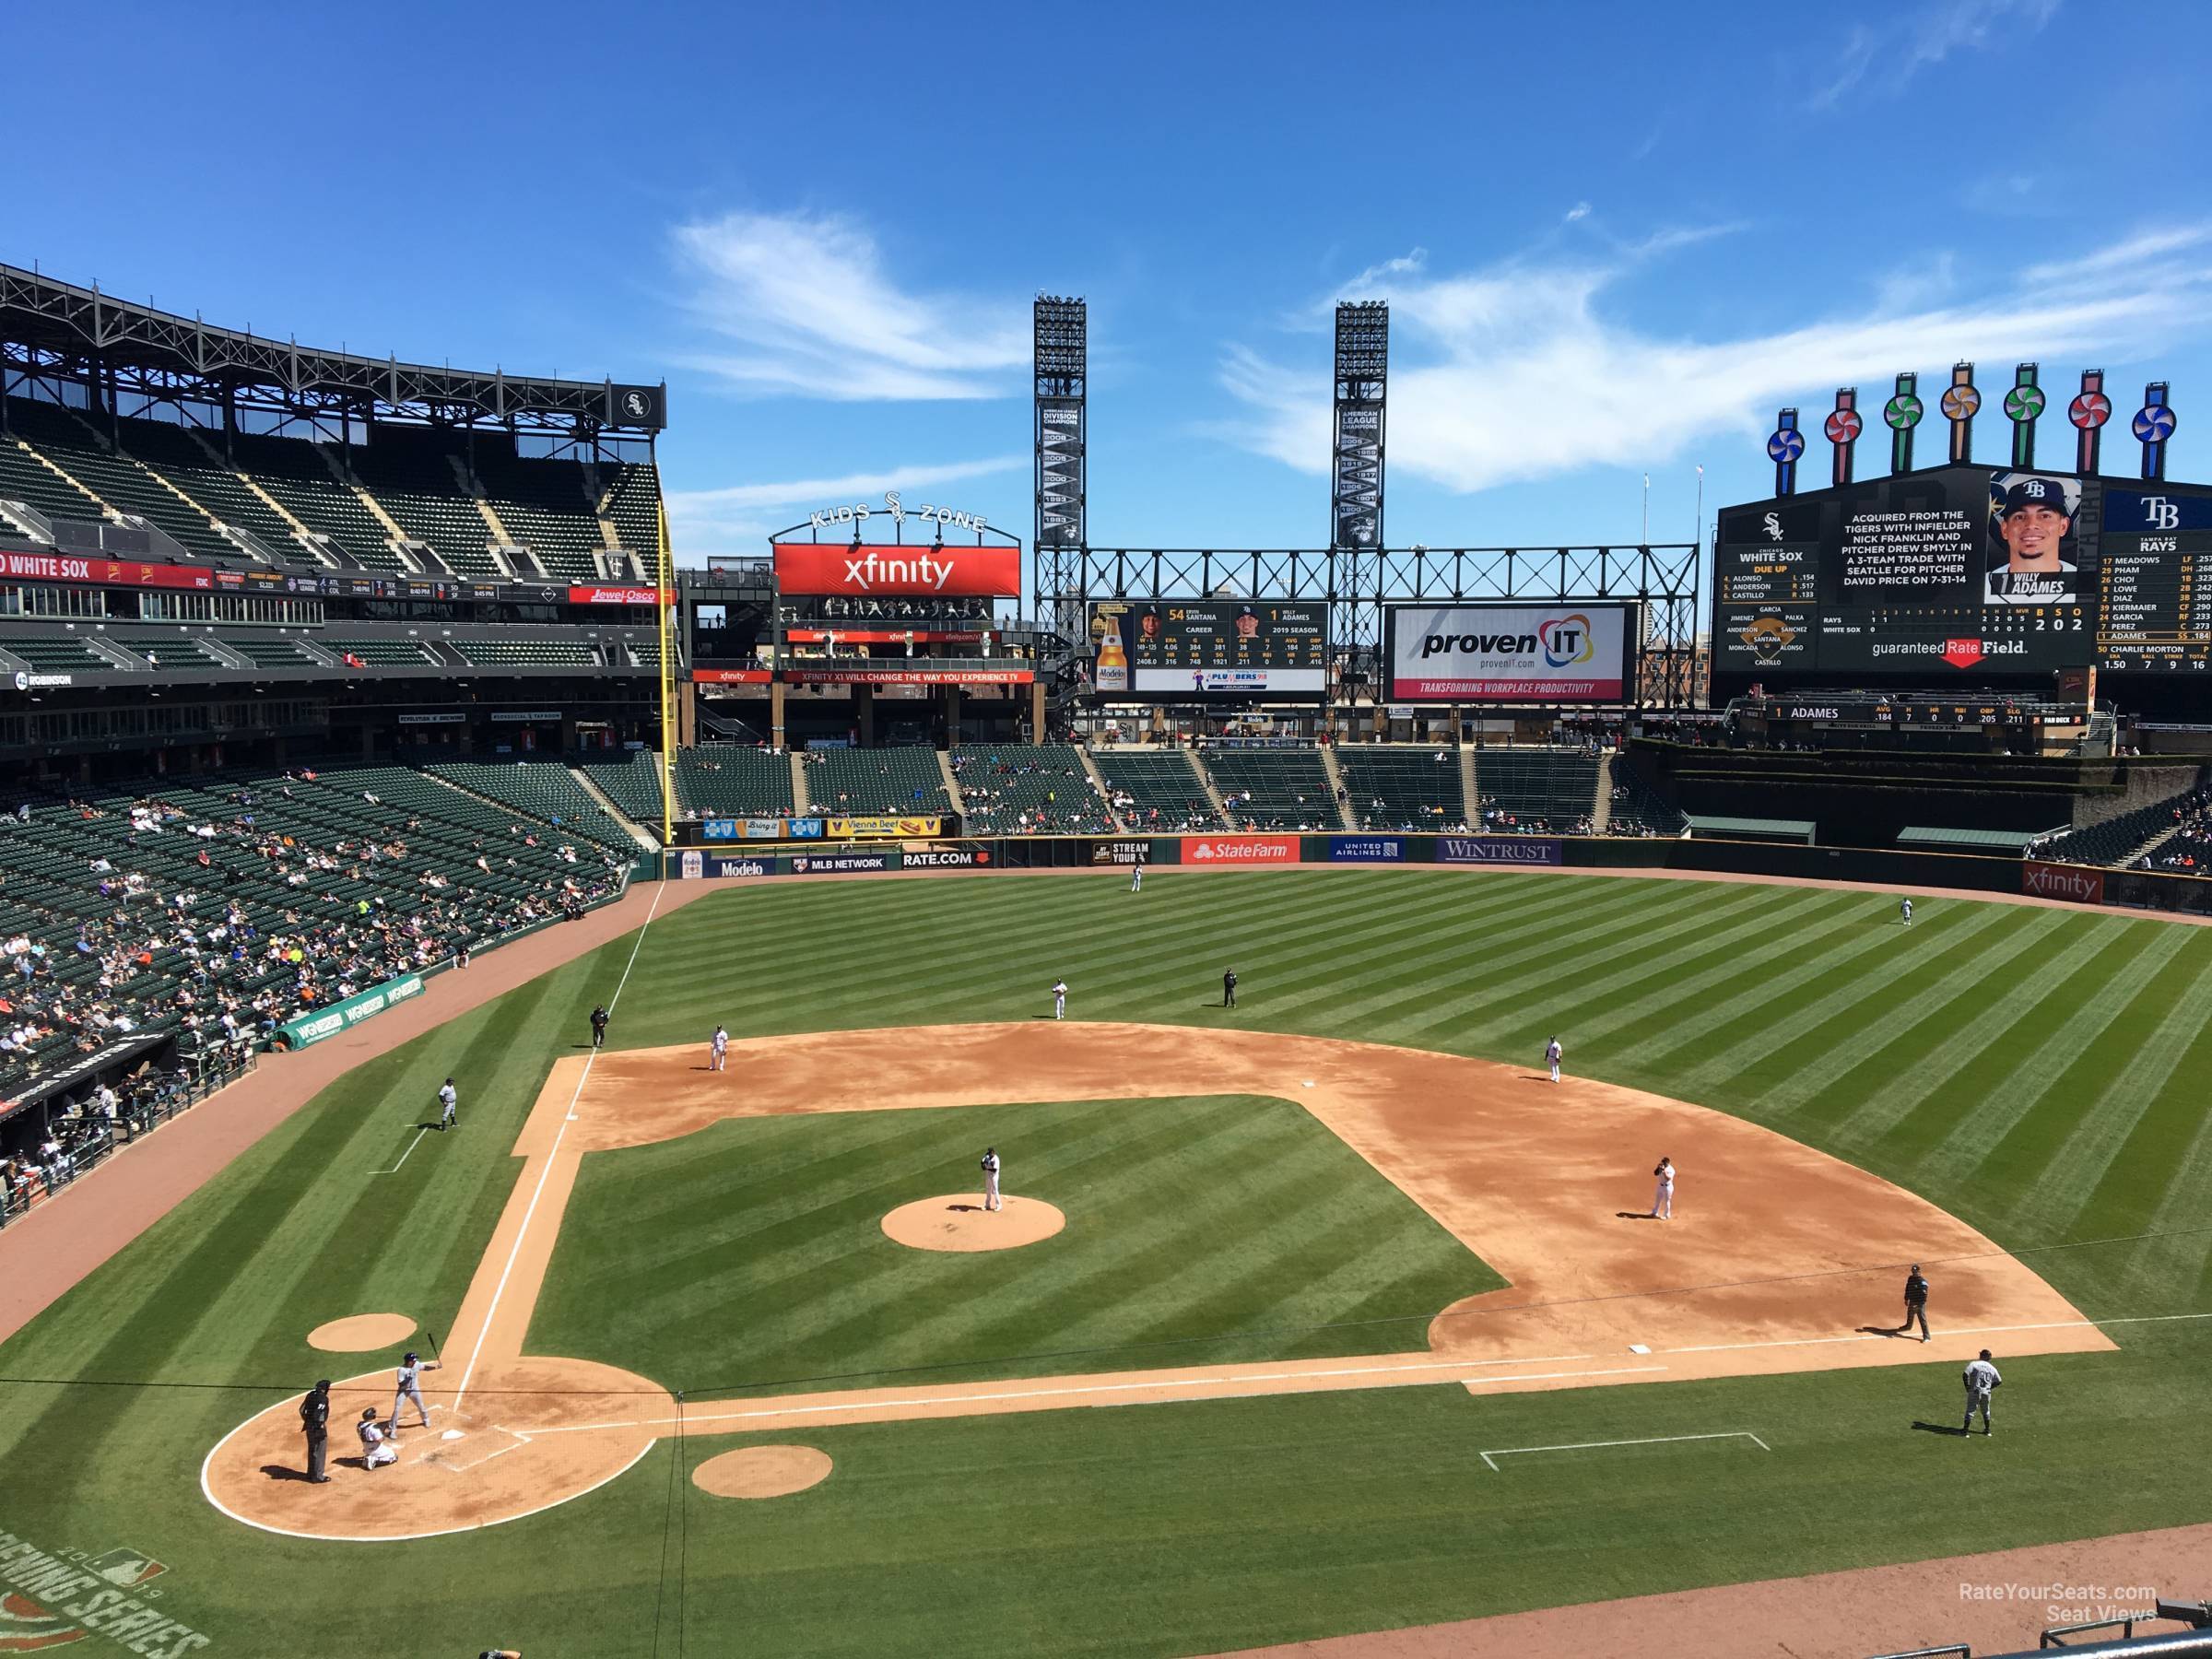 section 328, row 1 seat view  - guaranteed rate field